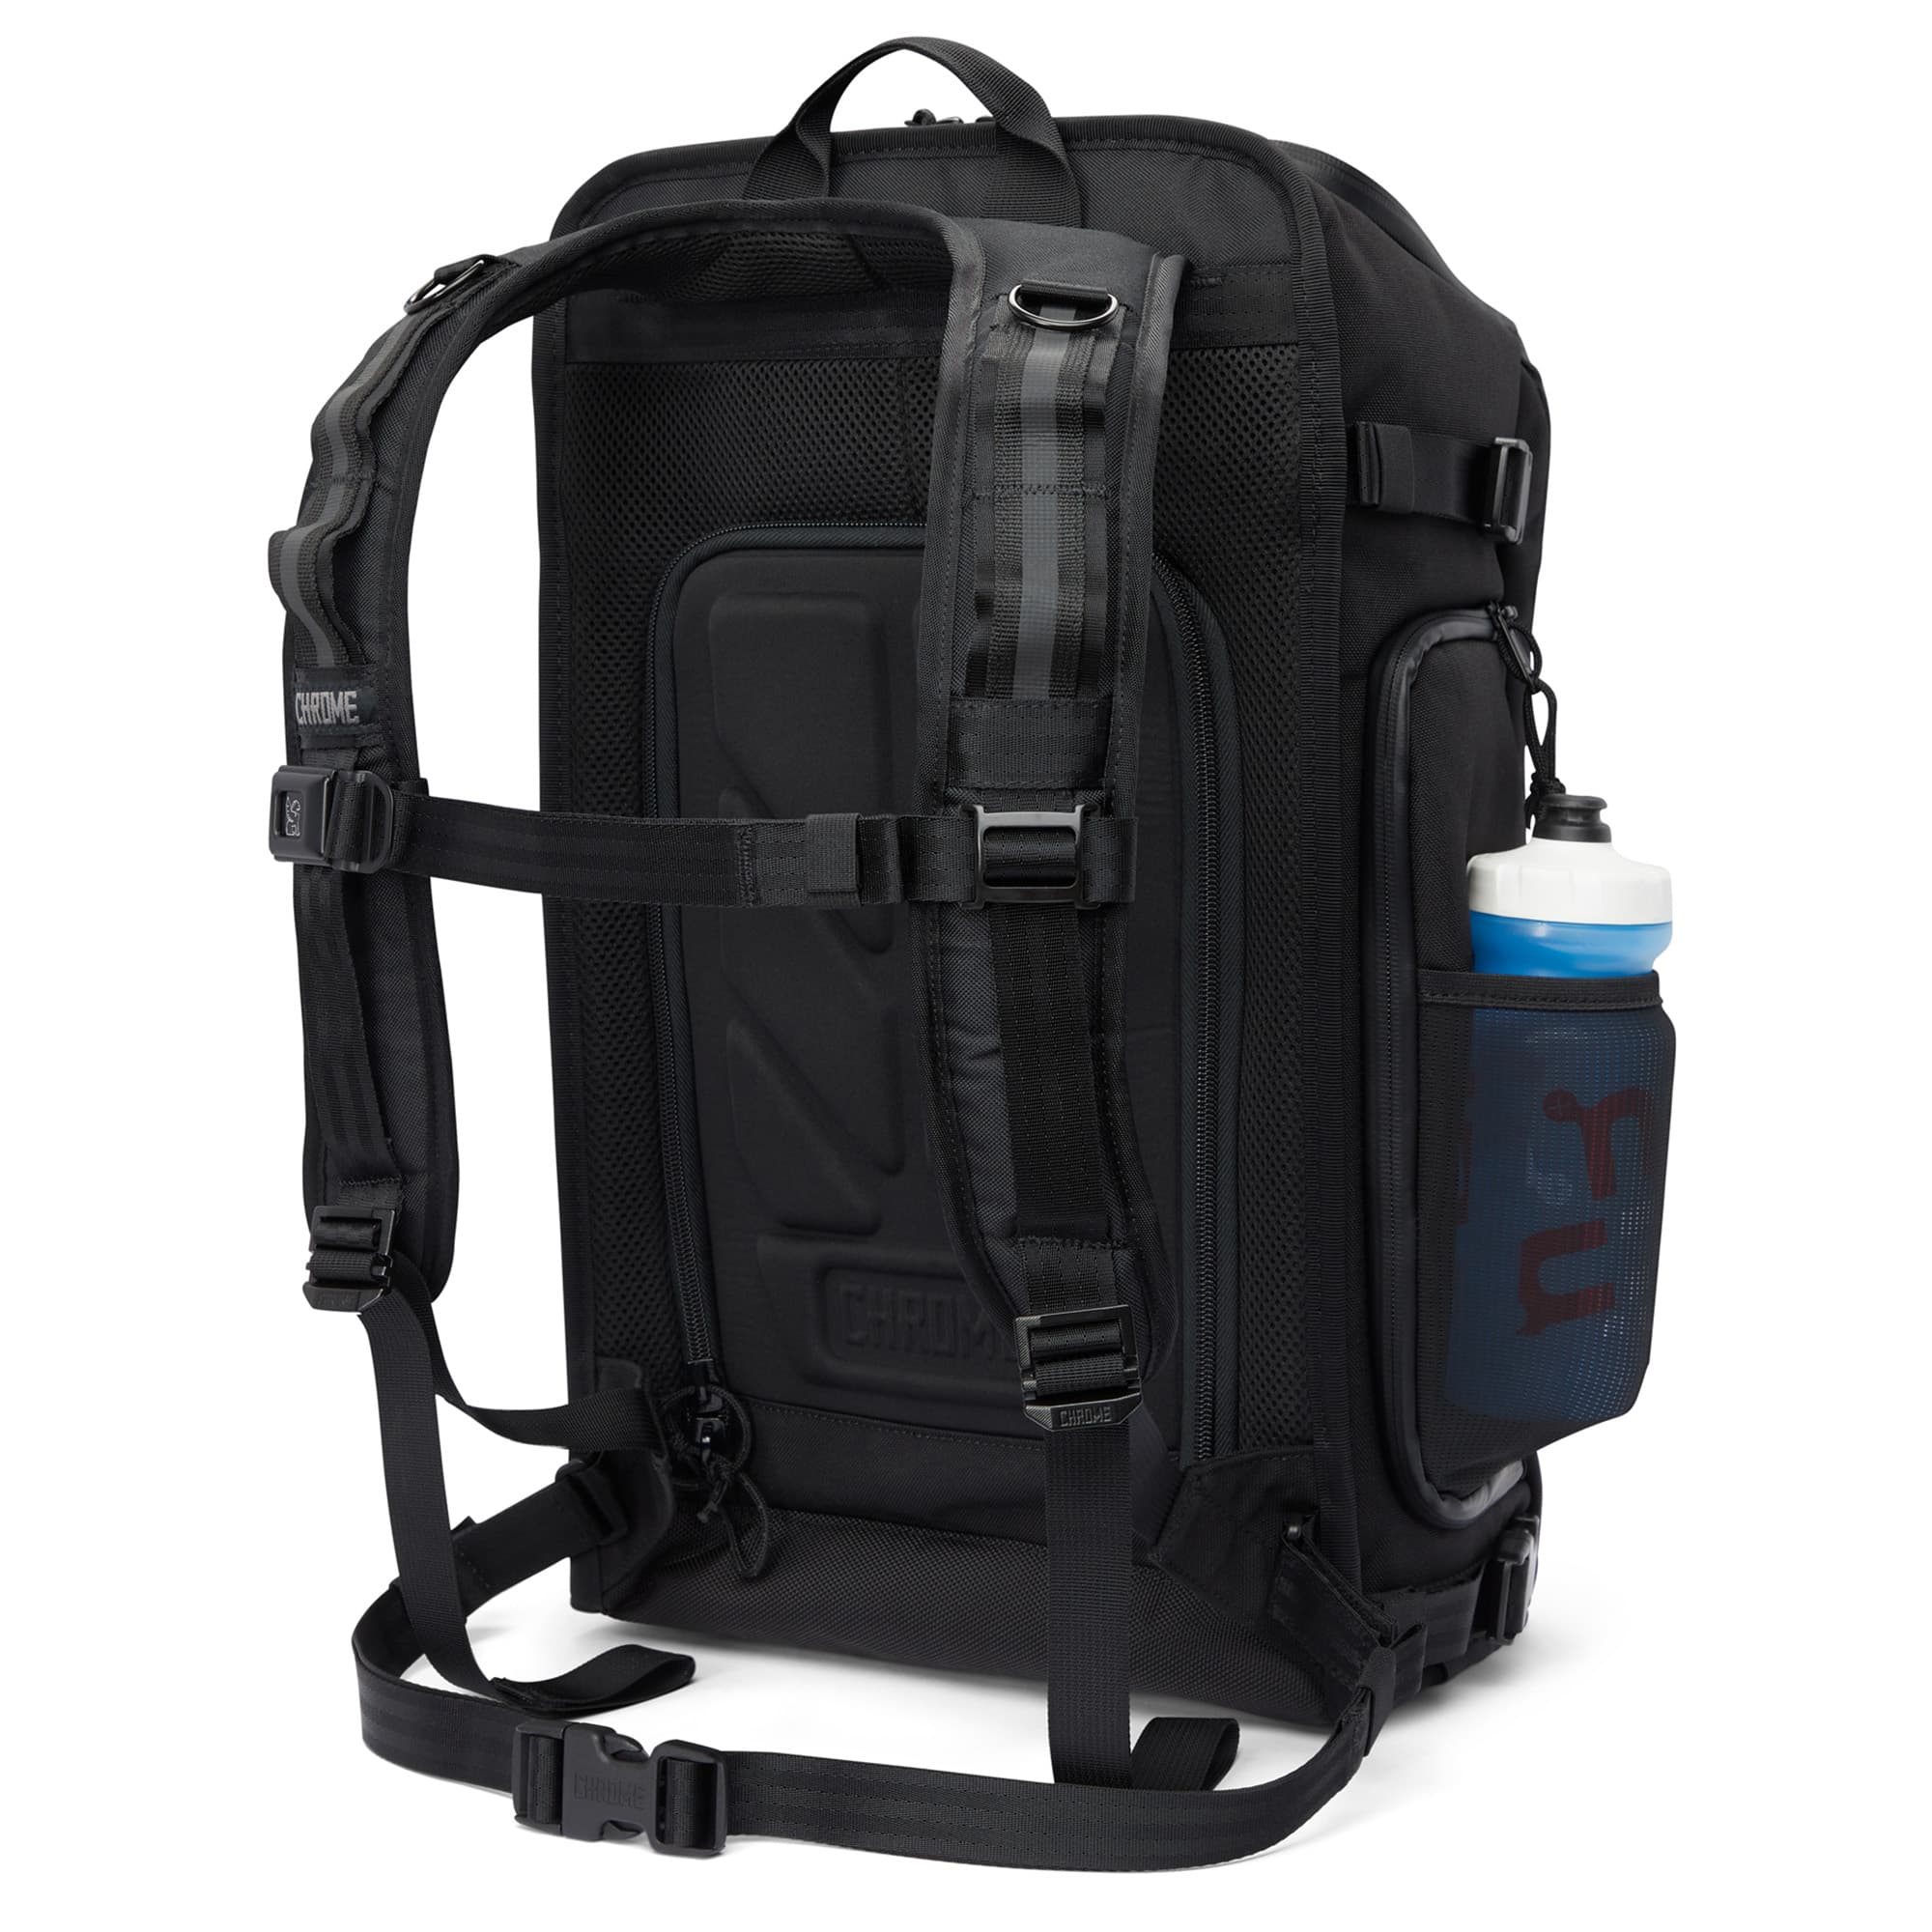 Niko camera tech backpack in black harness view